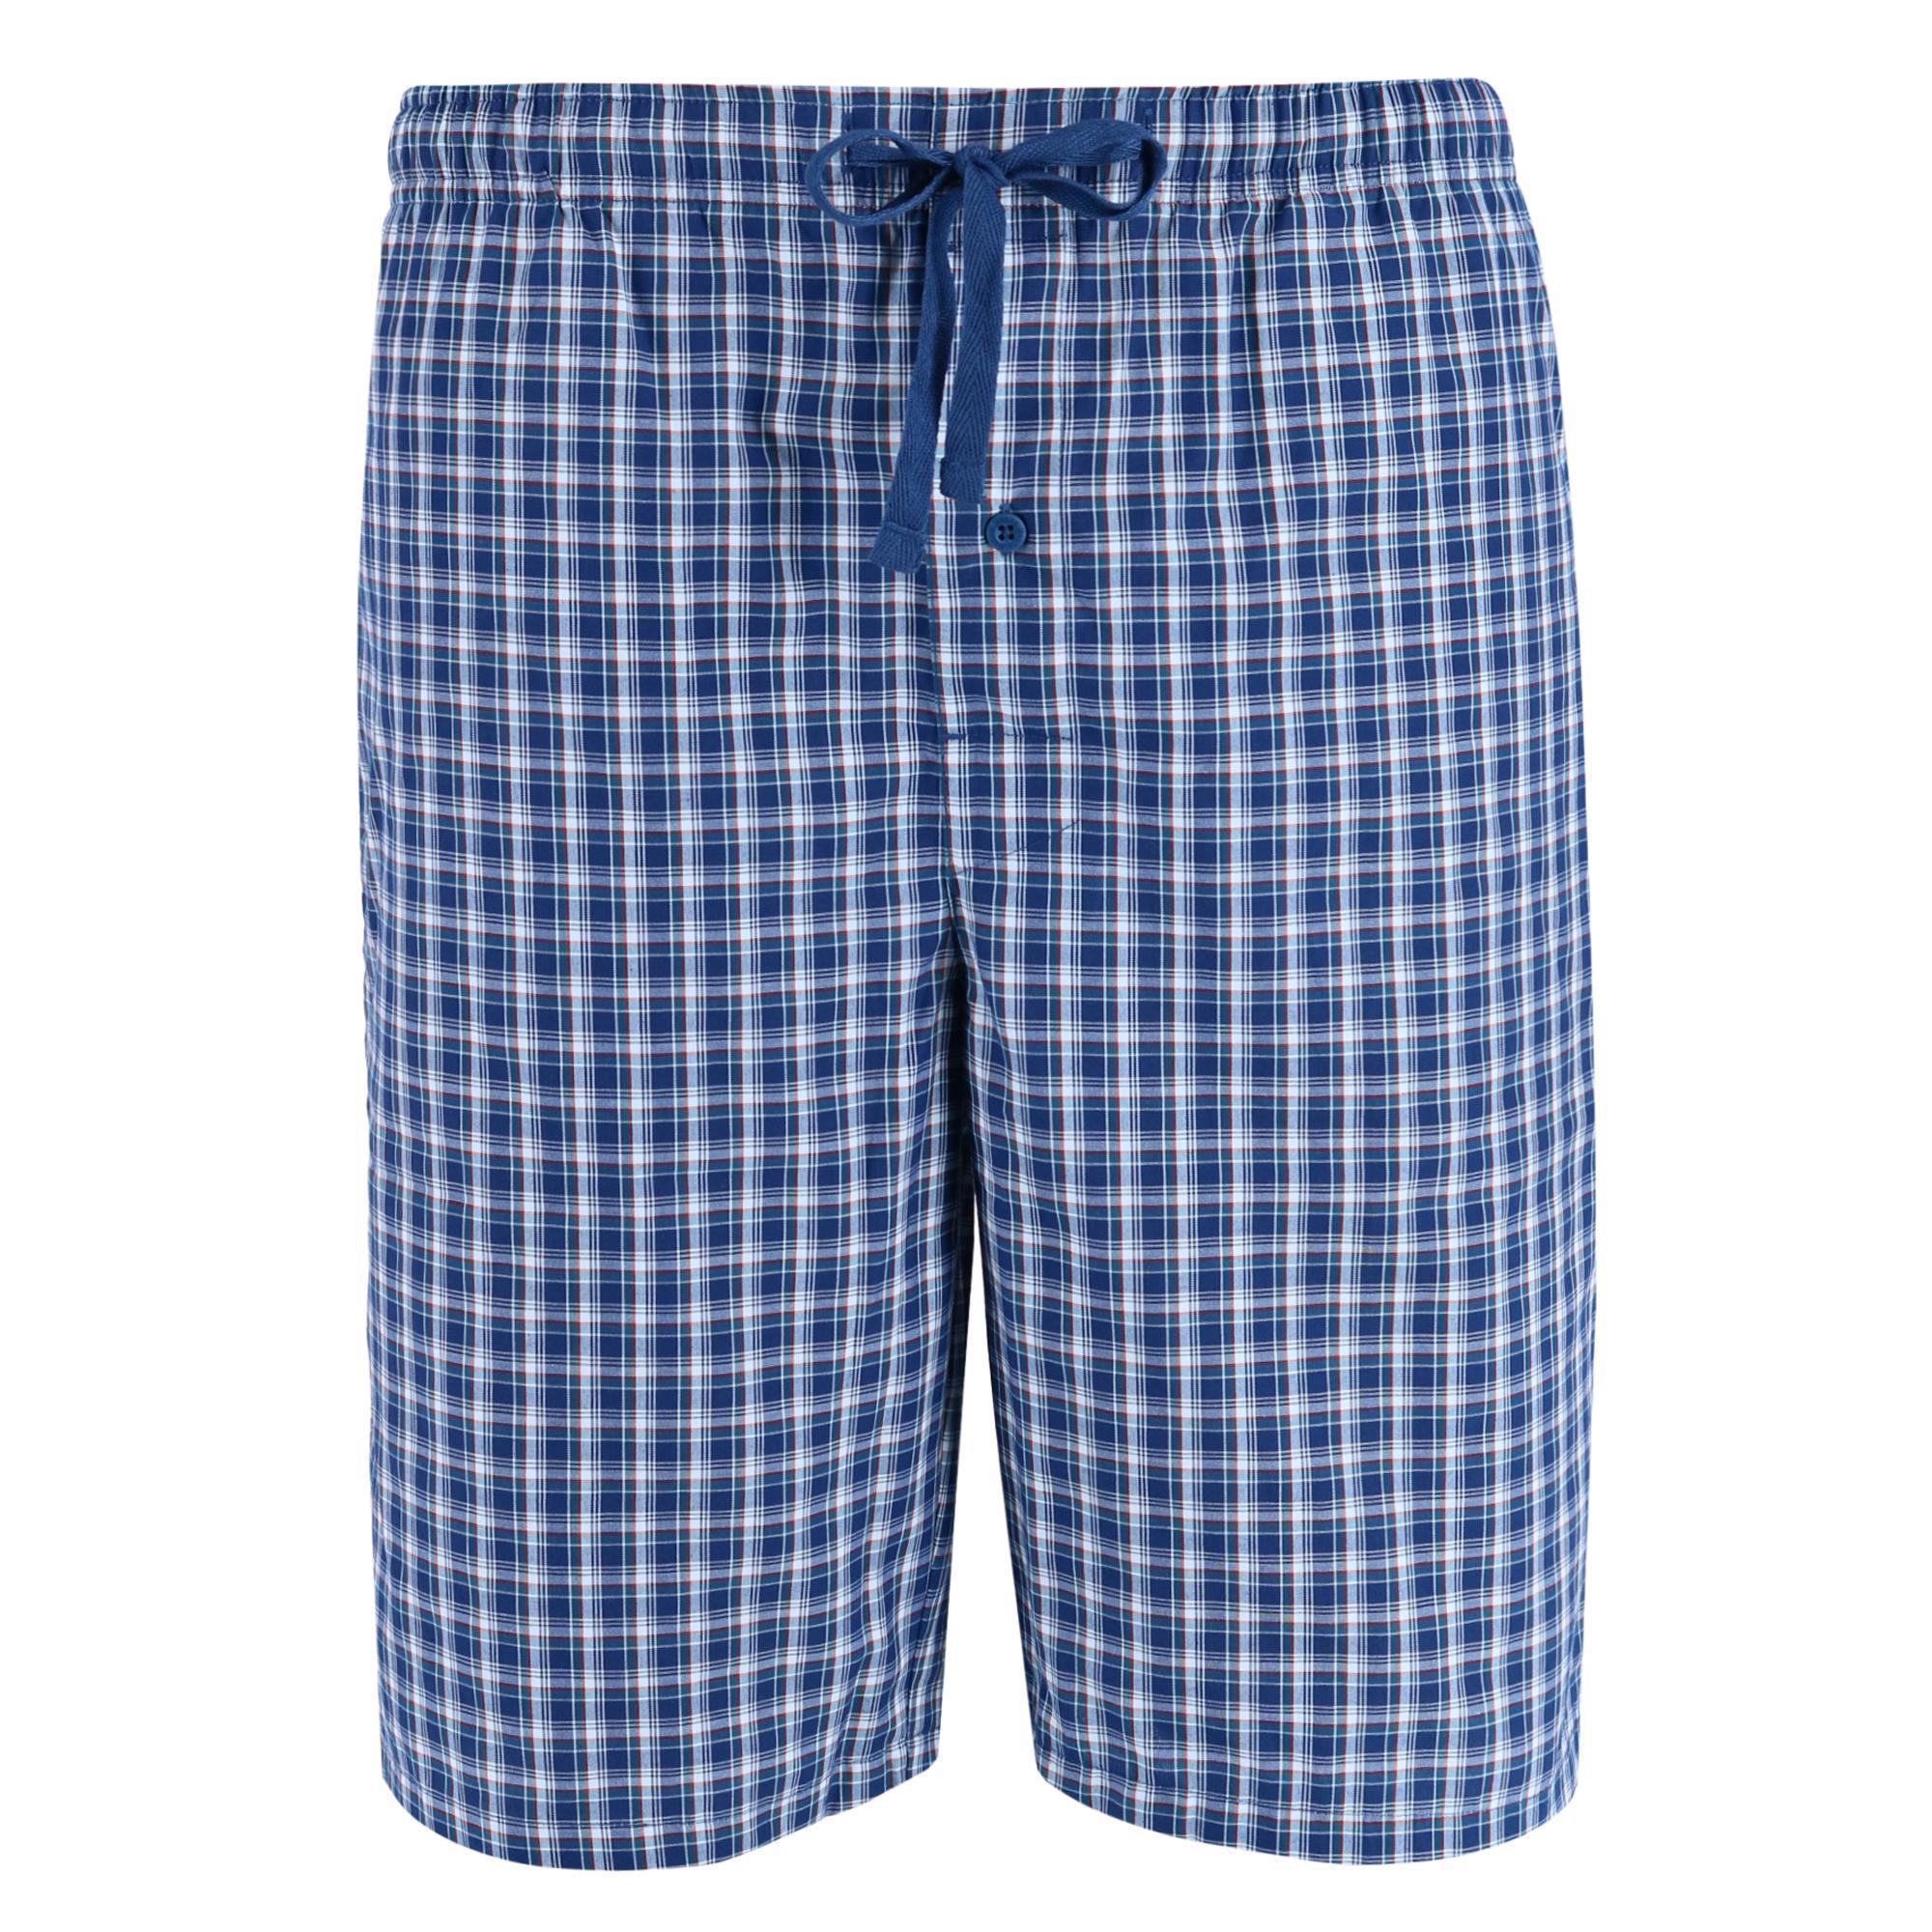 Selected Color is Navy and White Plaid